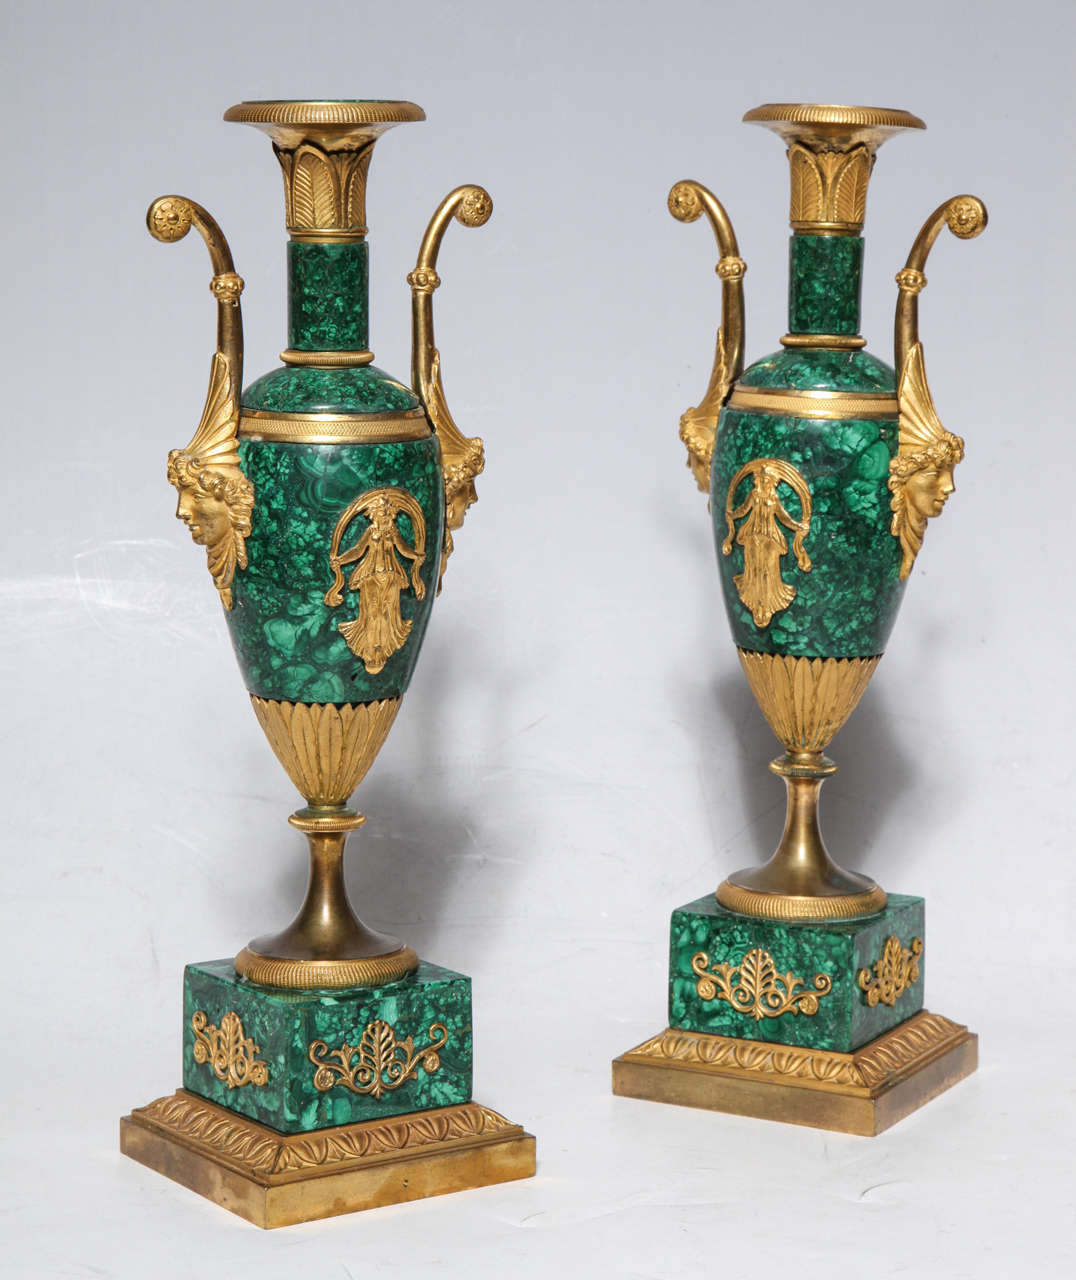 Pair of neoclassical Empire period Russian malachite and dore bronze double handled vases. The vases are decorated with matte and burnished two toned dore bronze, beautifully chased dancing female figures and intricately carved female face masks on